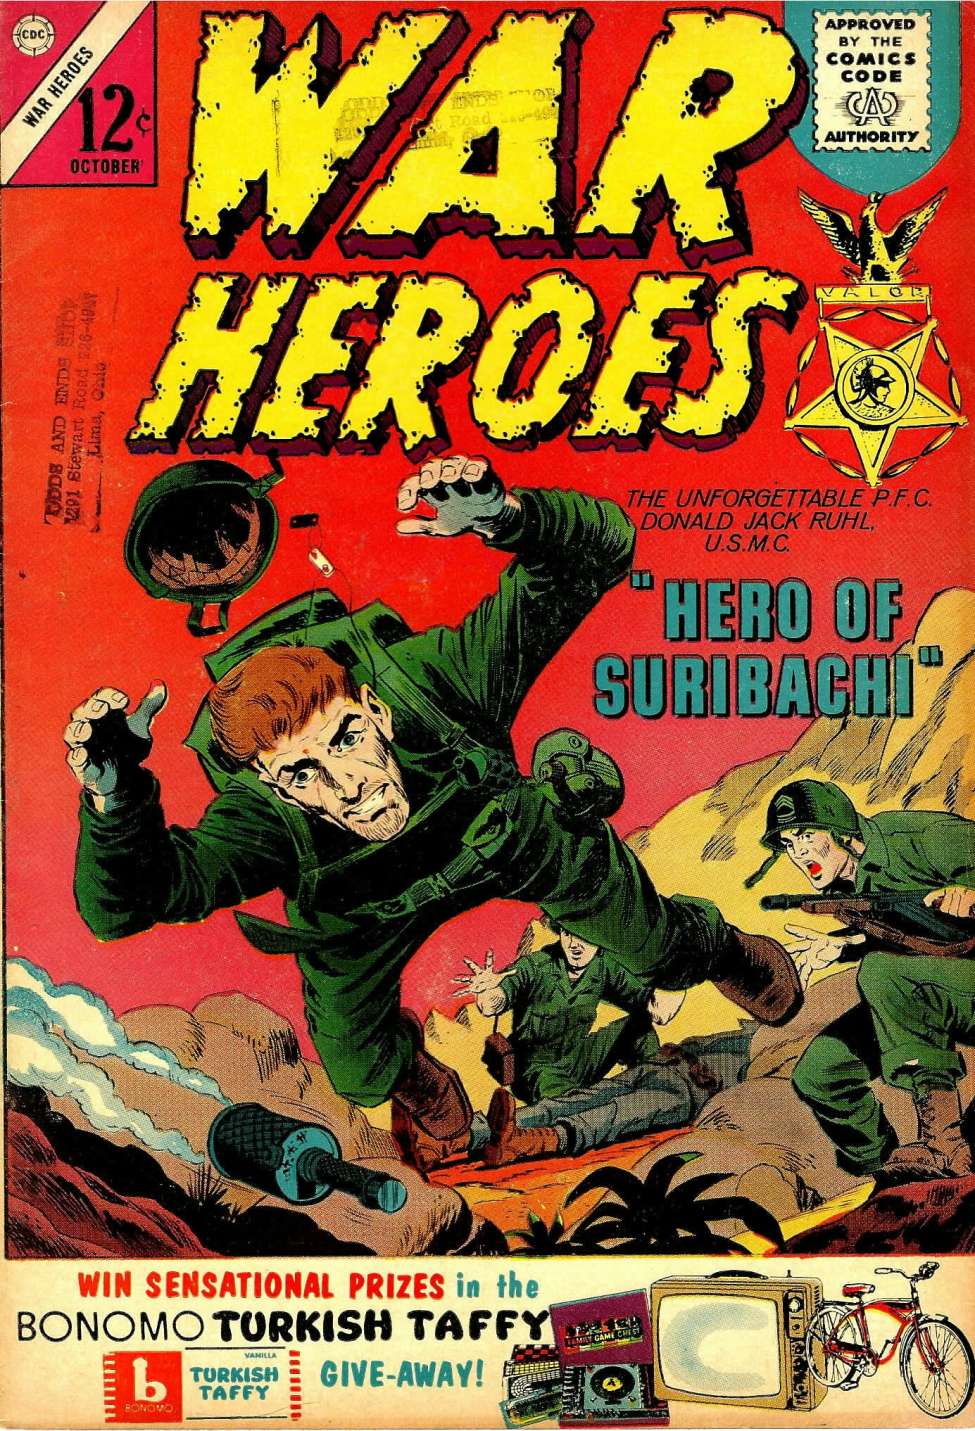 Book Cover For War Heroes 5